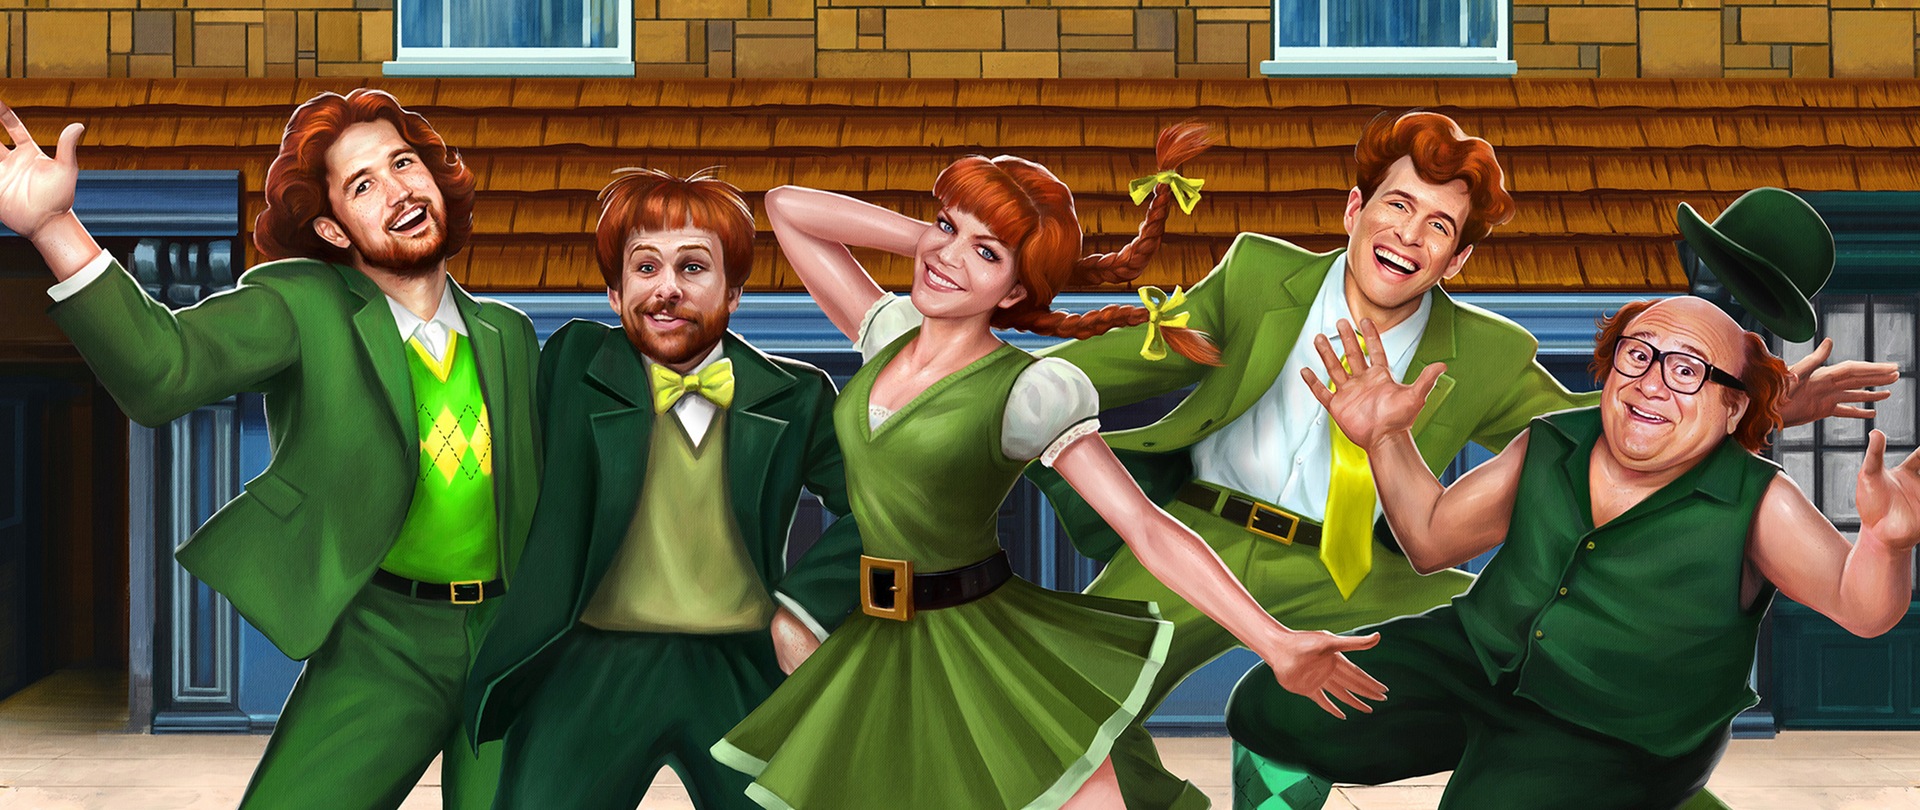 Sunny cast as cartoons in green outfits posing in front of the pub for FX's It's Always Sunny